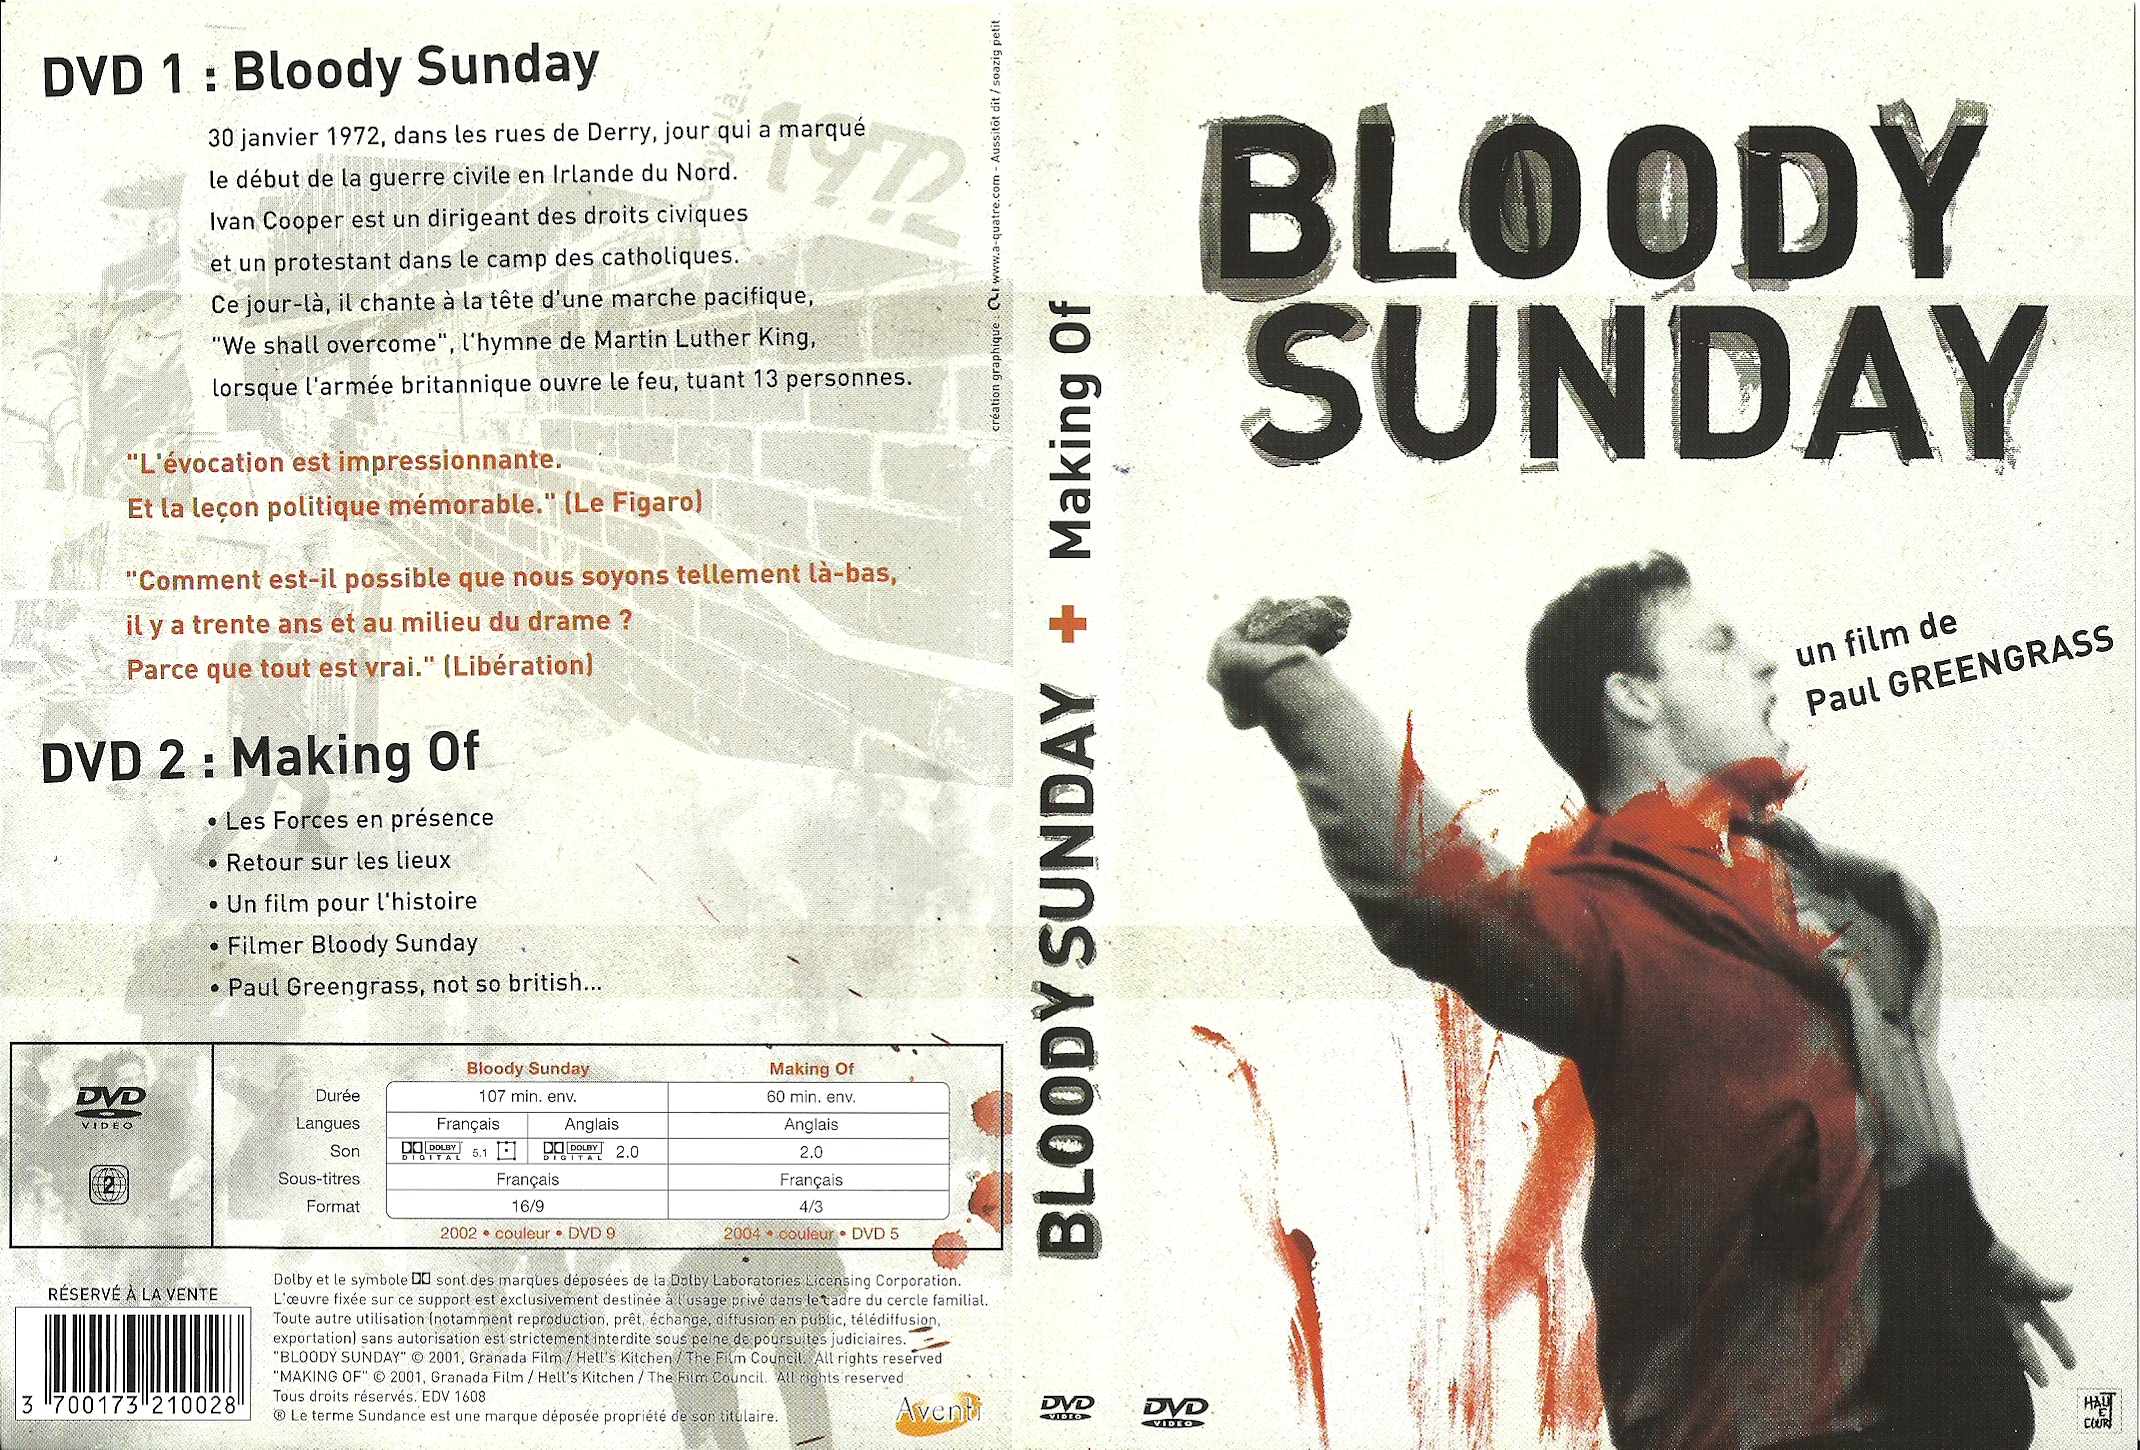 Jaquette DVD Bloody Sunday v2